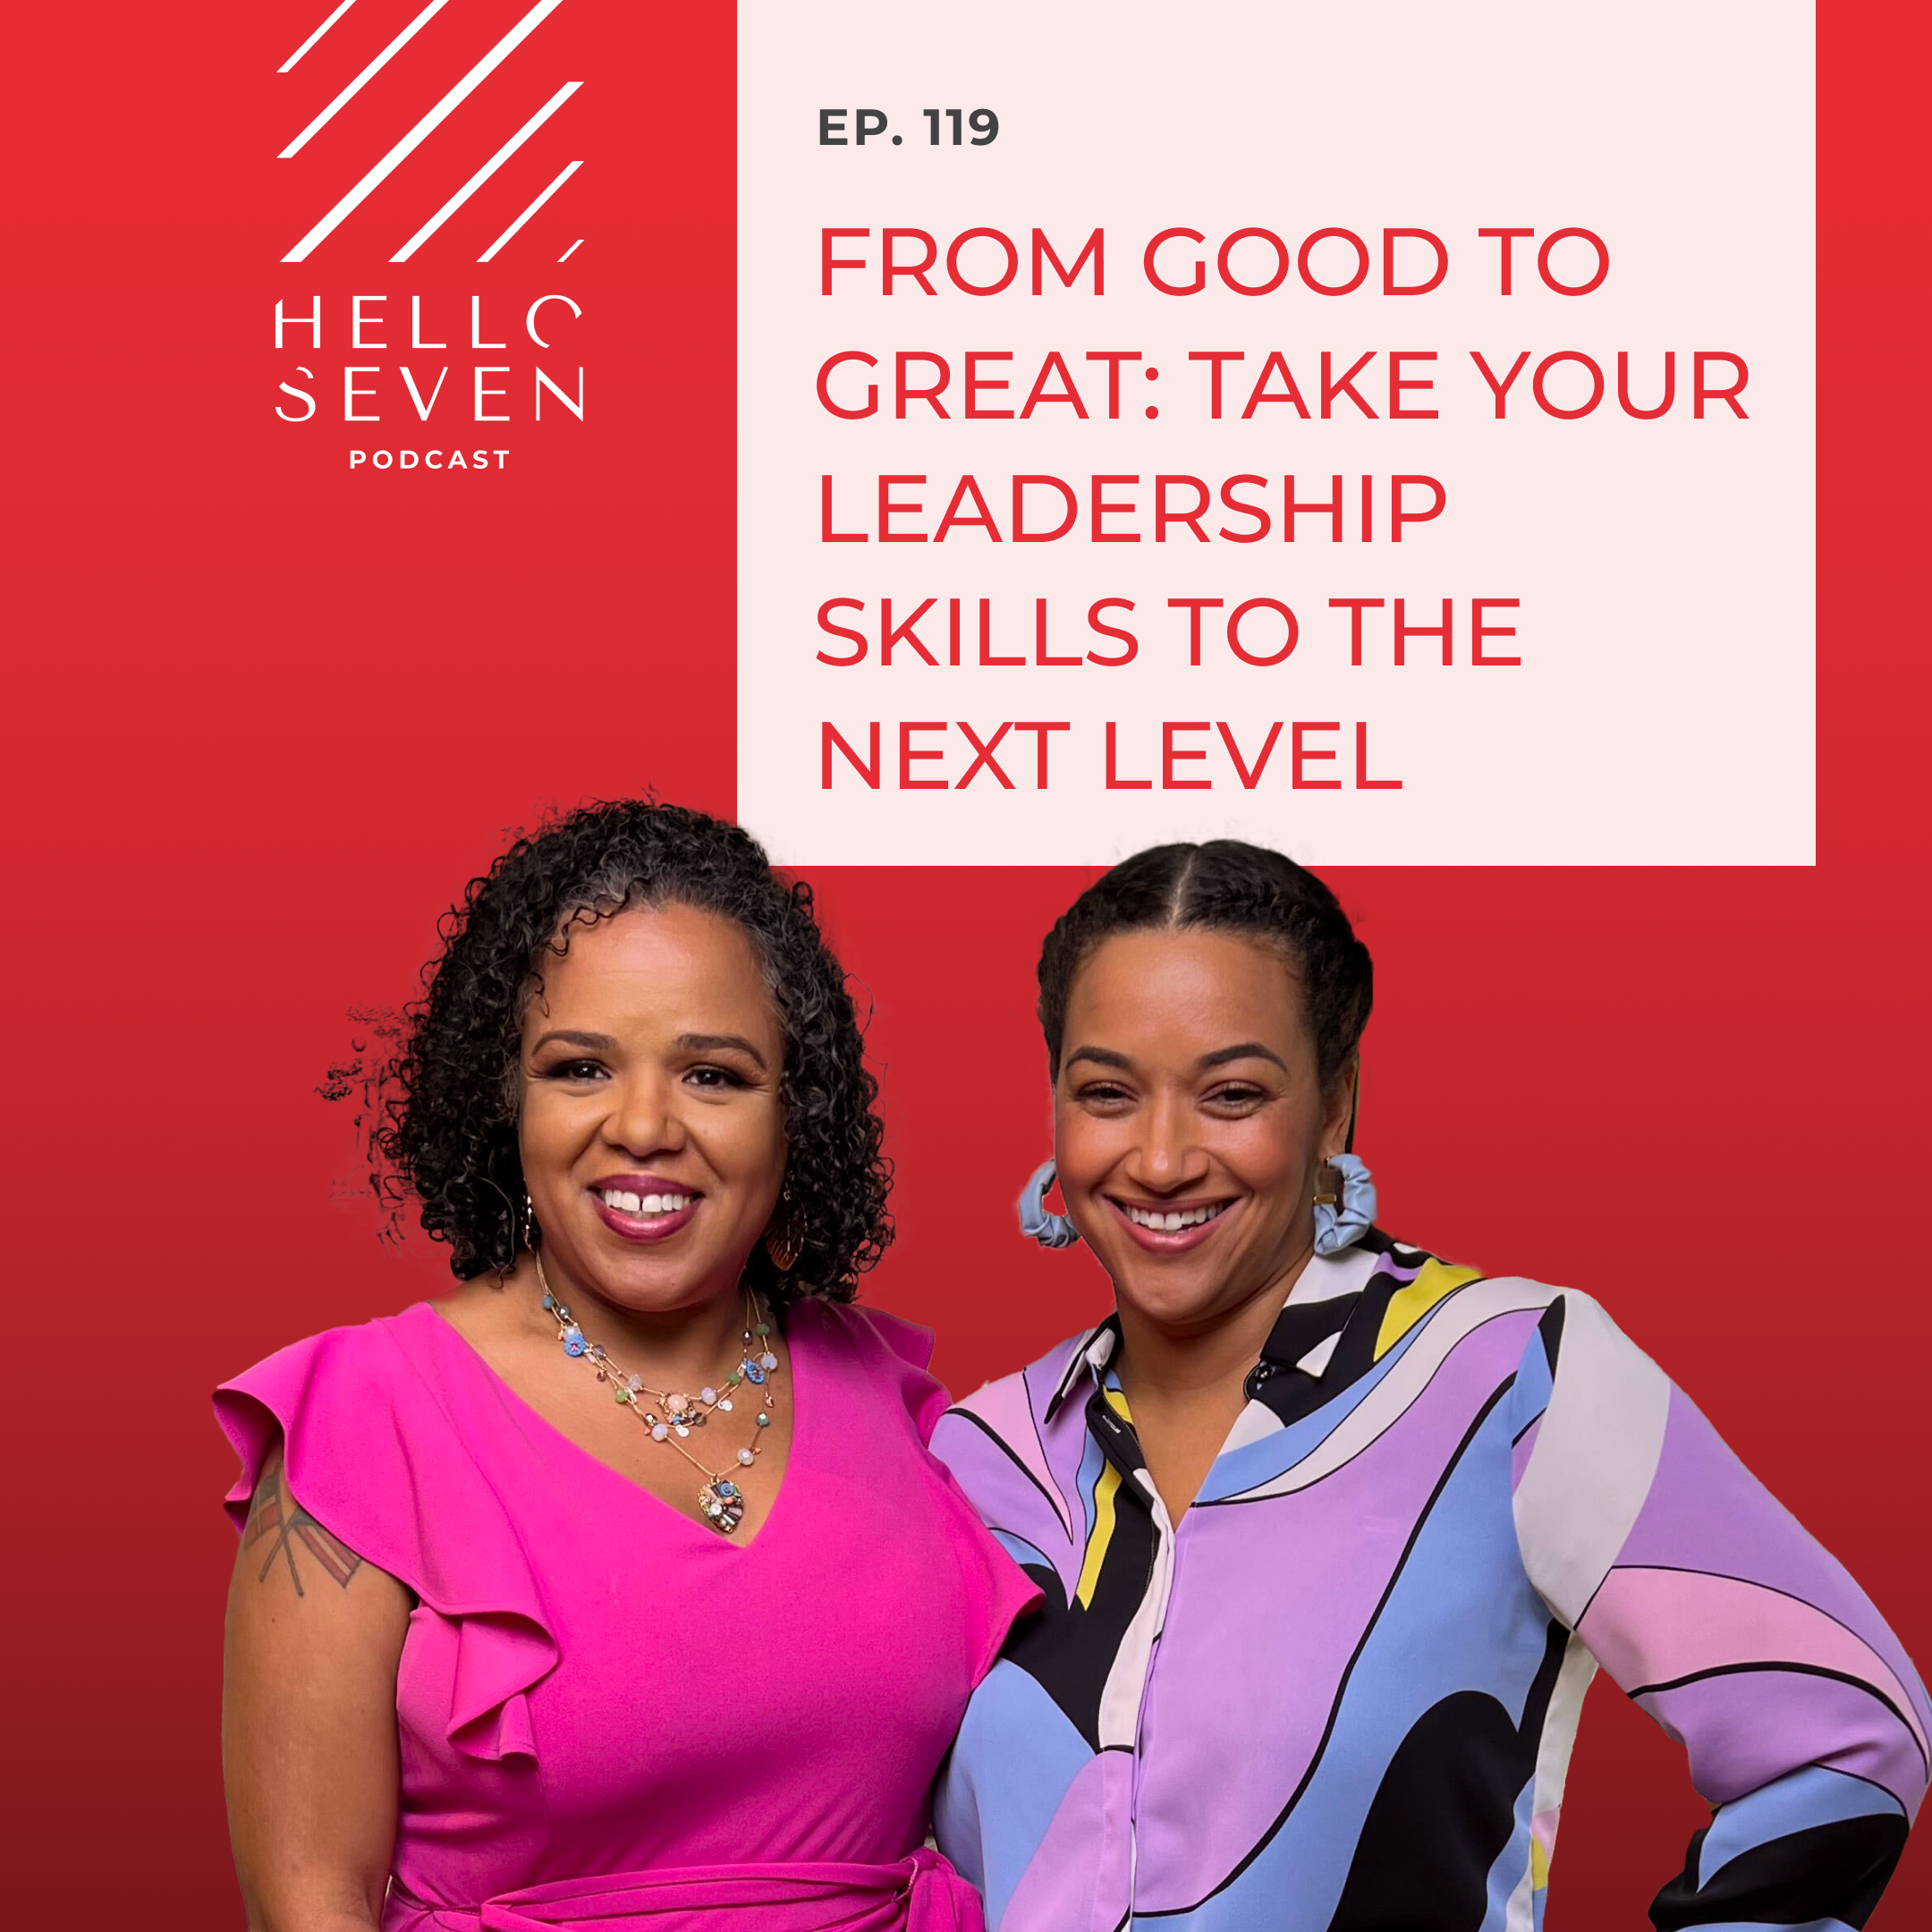 Hello Seven Podcast with Rachel Rodgers | From Good to Great: Take Your Leadership Skills to the Next Level